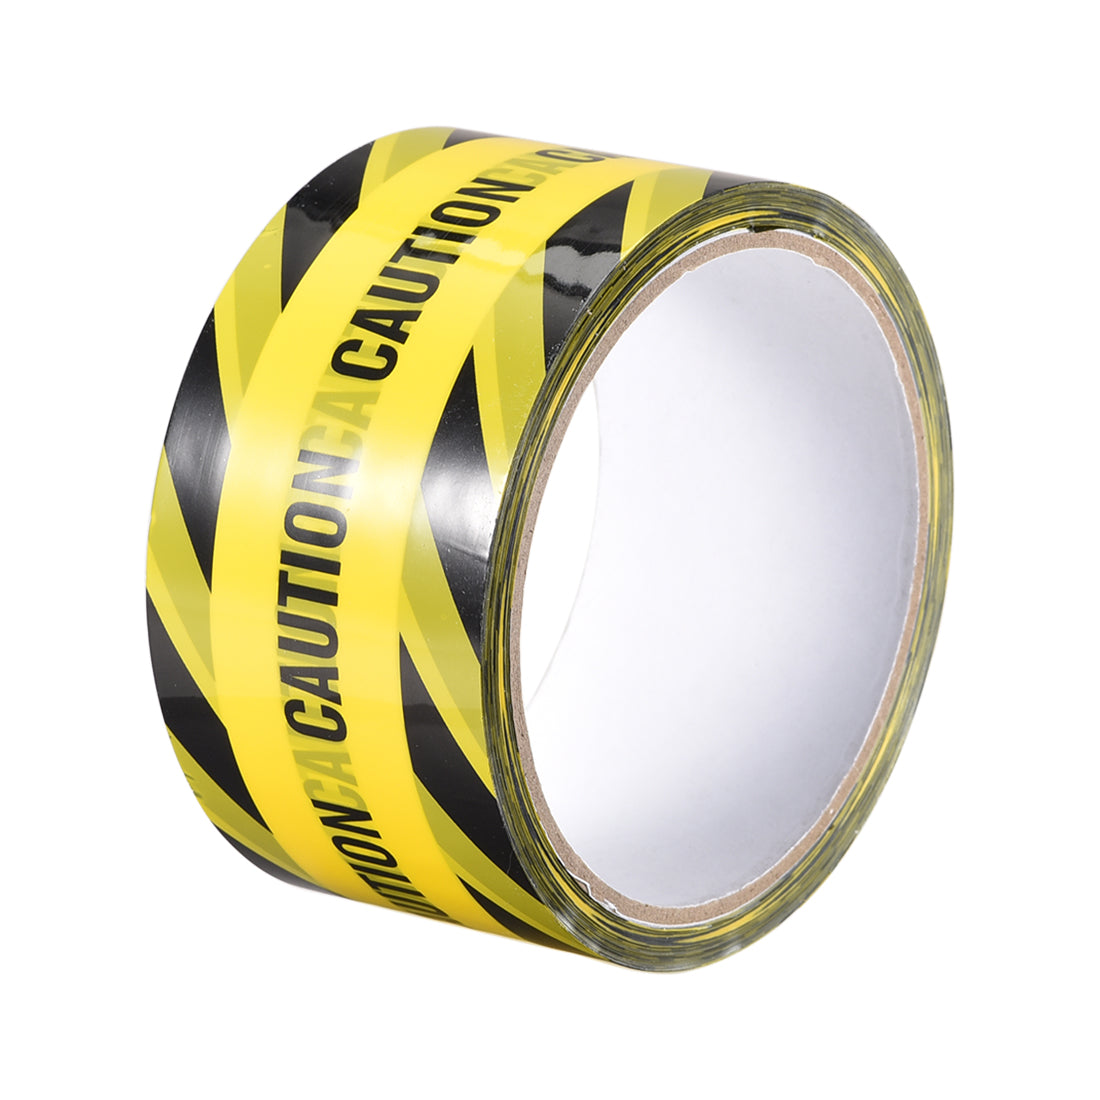 uxcell Uxcell Caution Stripe Sticker Adhesive Tape CAUTION Mark, 82 Ft x 2 Inch(LxW), Yellow Black for Workplace Office Wet Floor Caution